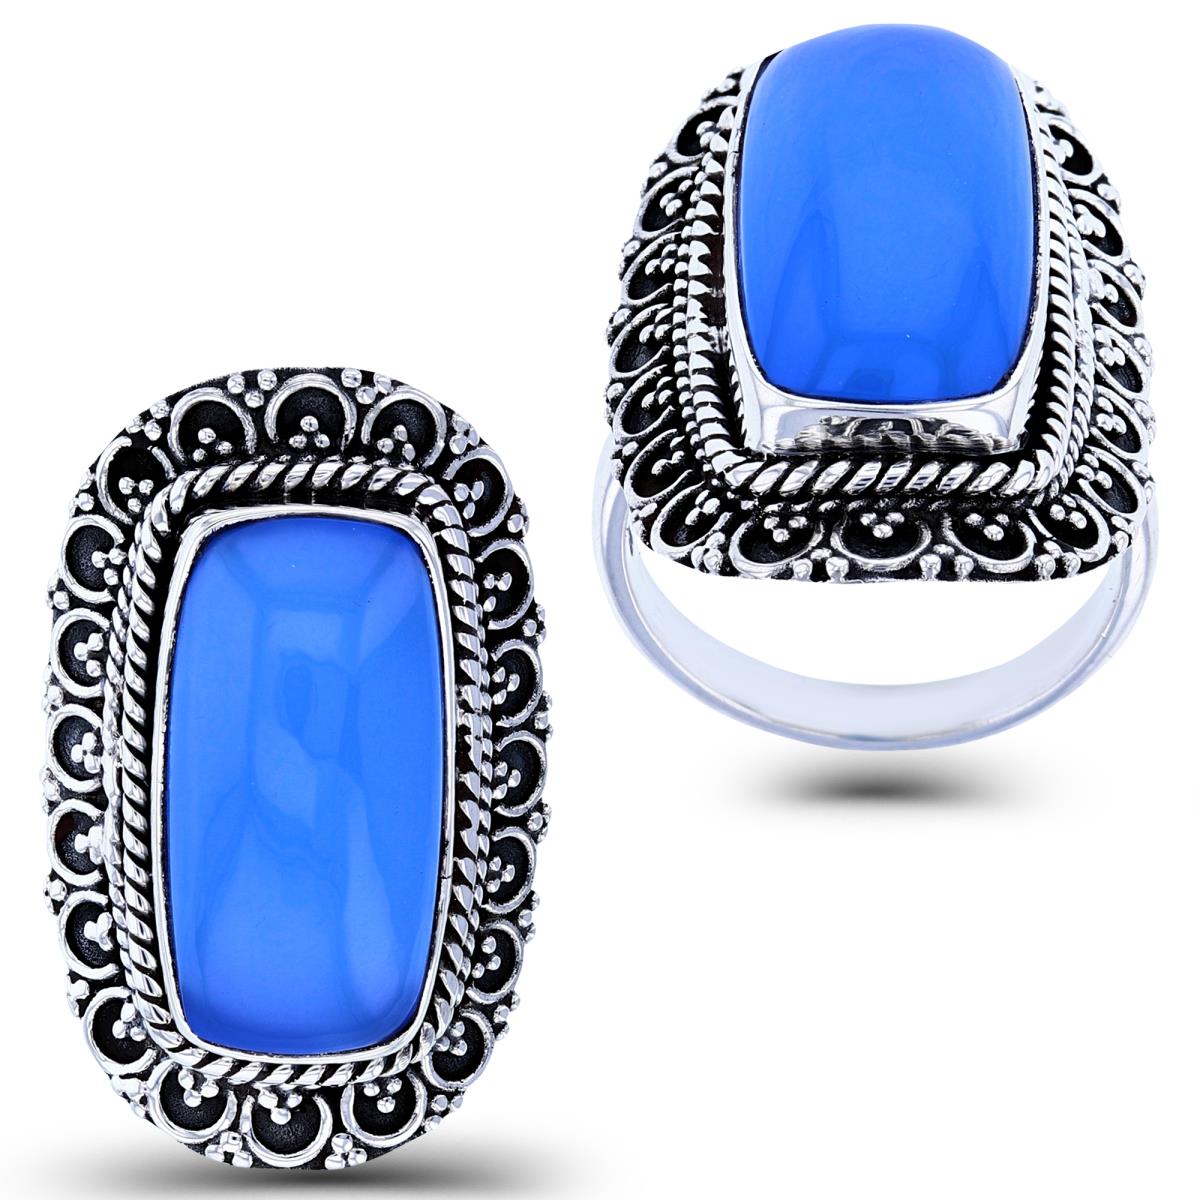 Sterling Silver Oxidized Bezel 20x10mm Cush Cabochon Blue Chalcedony Textured Ring